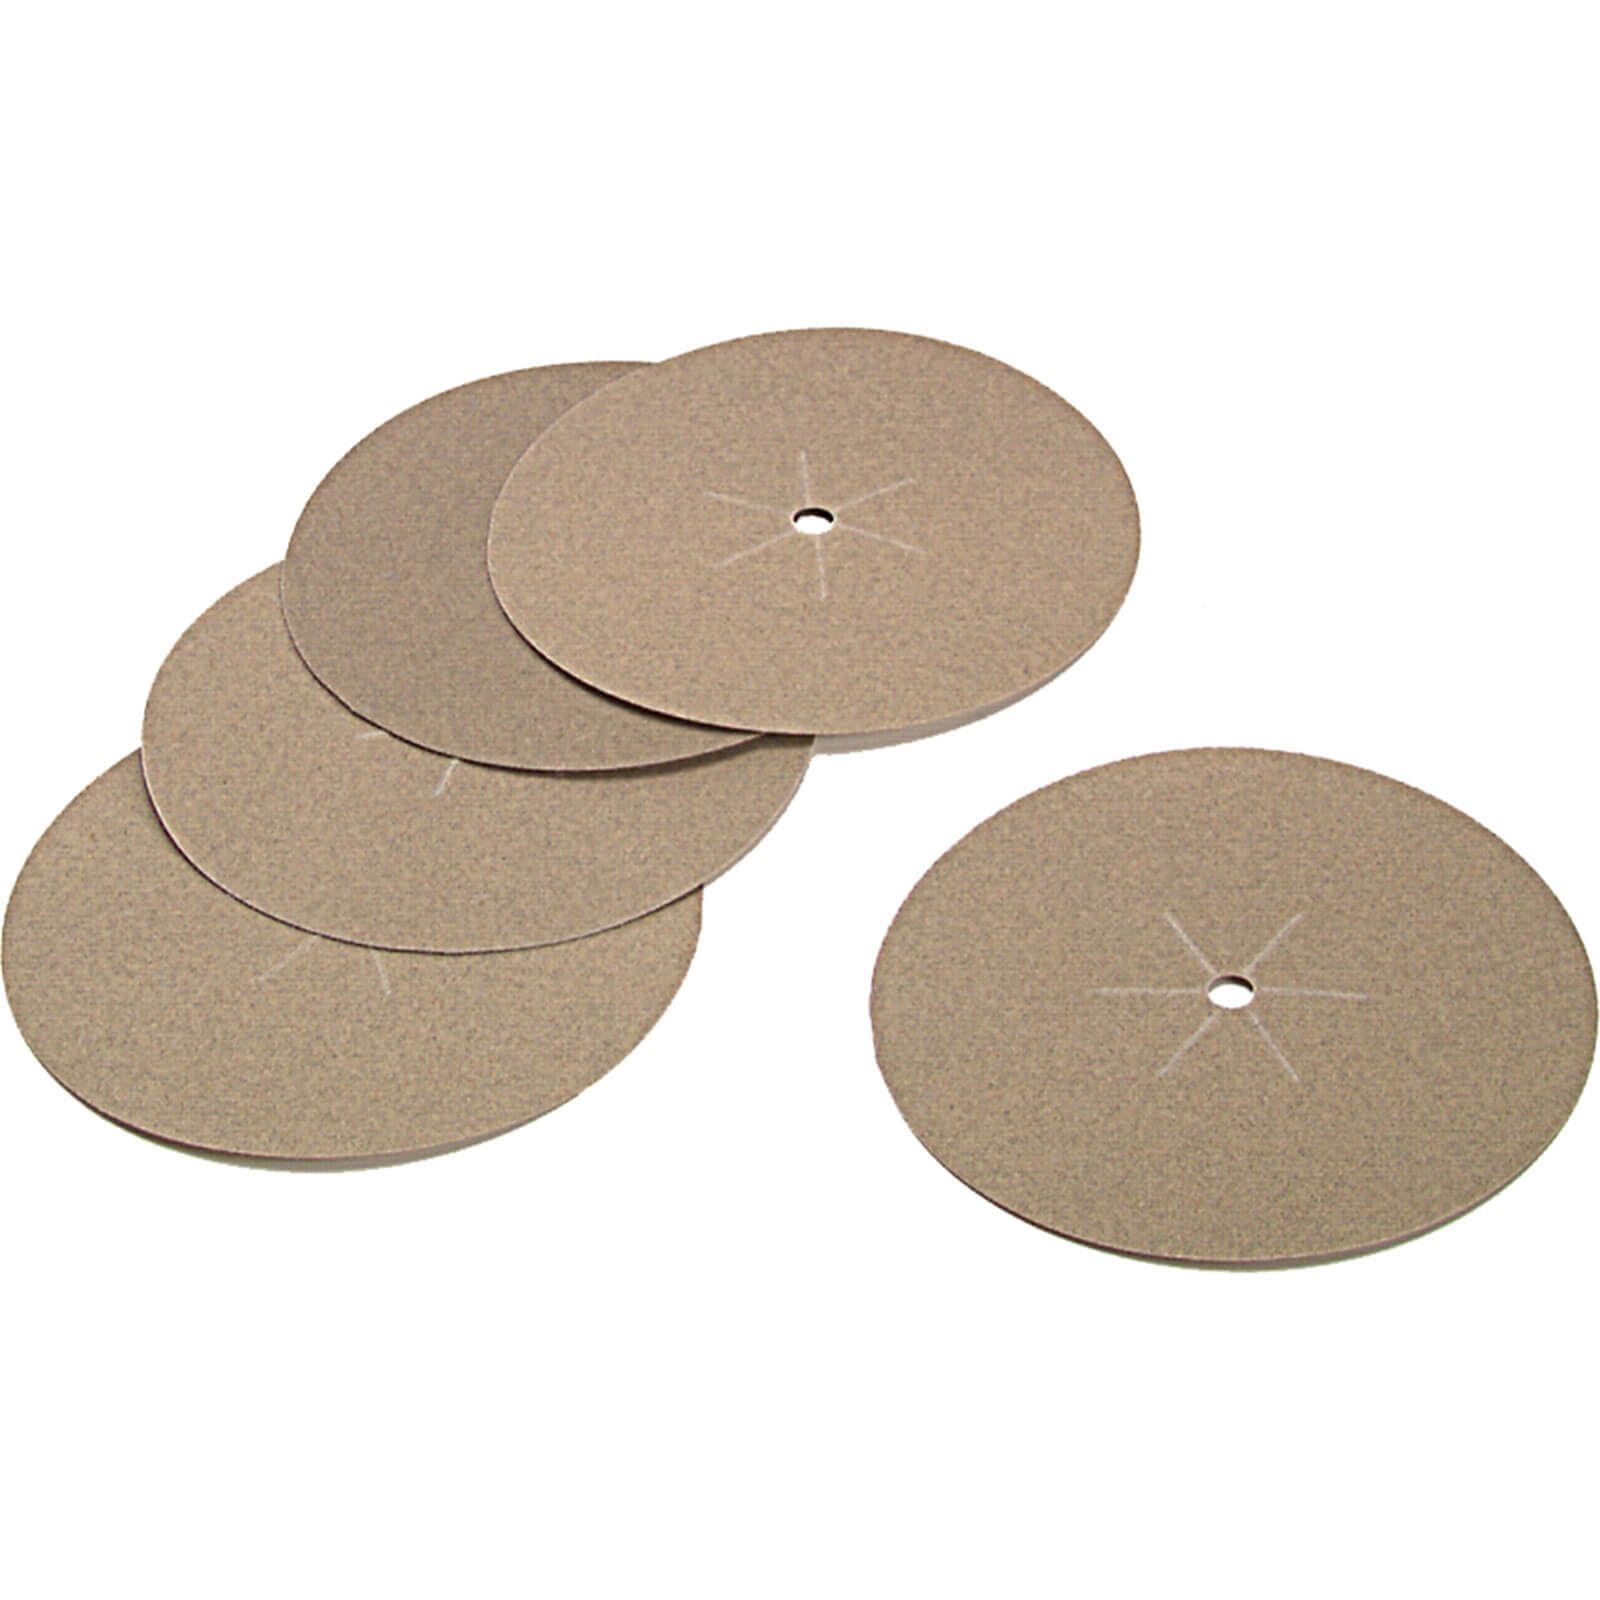 Photo of Black And Decker Piranha Drill Sanding Discs 125mm 125mm 80g Pack Of 5